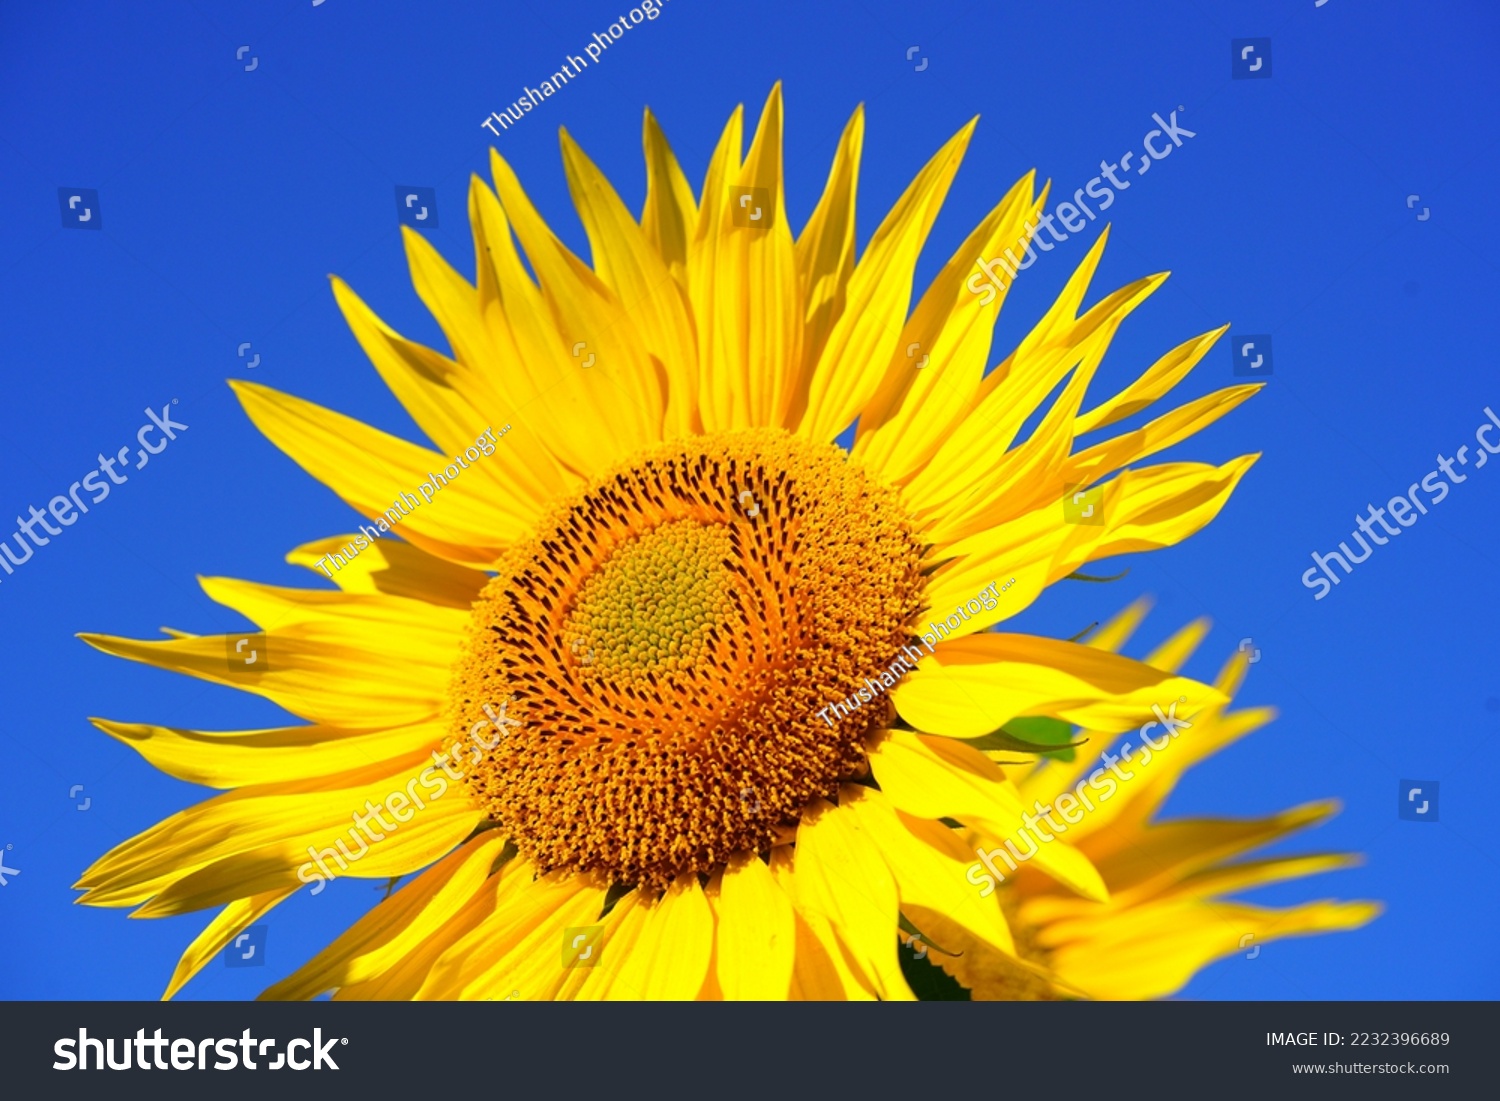 Sunflower natural background, Sunflower blooming, Sunflower oil improves skin health and promote cell regeneration #2232396689